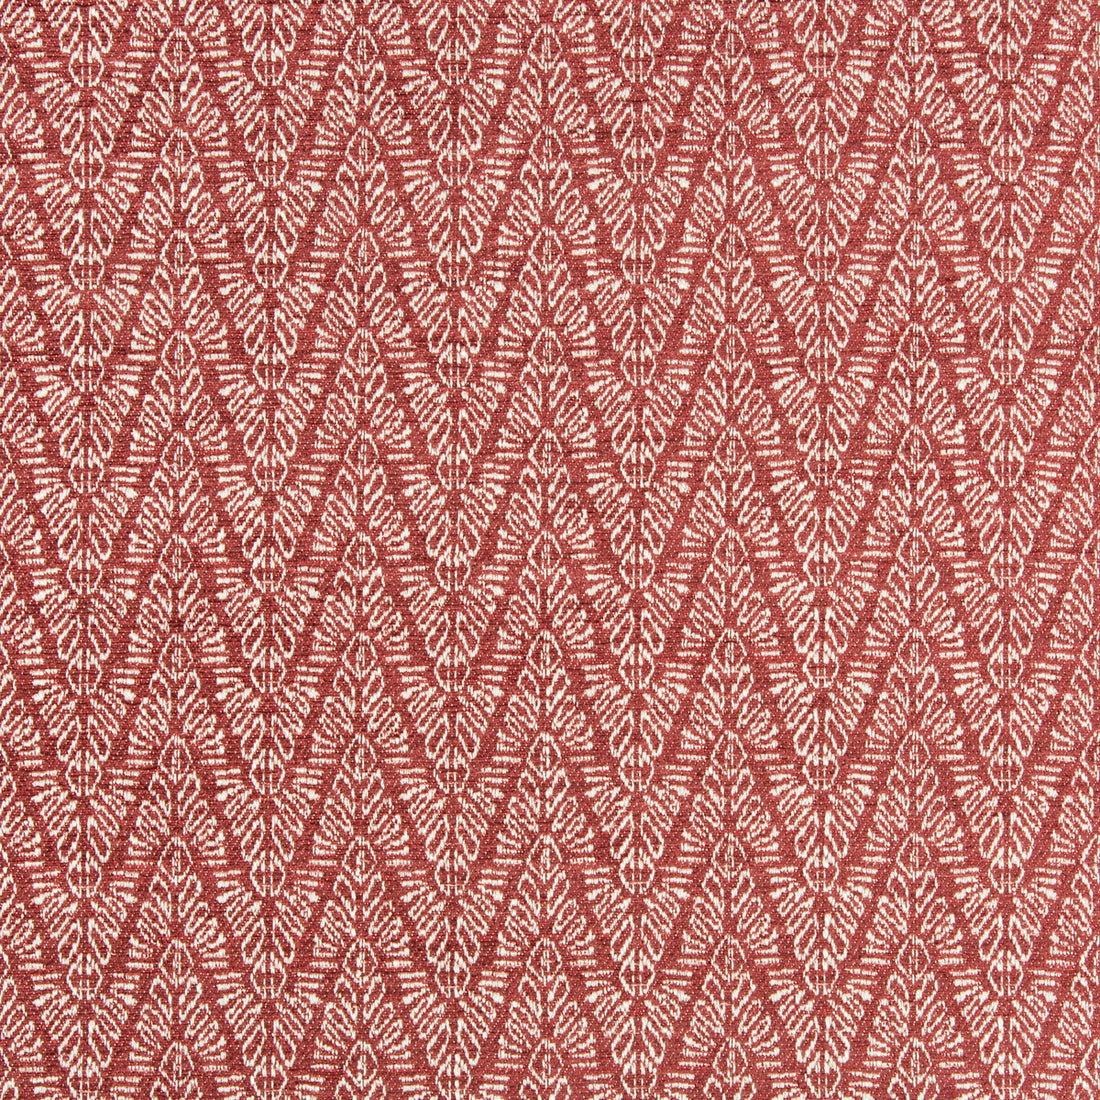 Topaz Weave fabric in cerise color - pattern GWF-3750.9.0 - by Lee Jofa Modern in the Gems collection